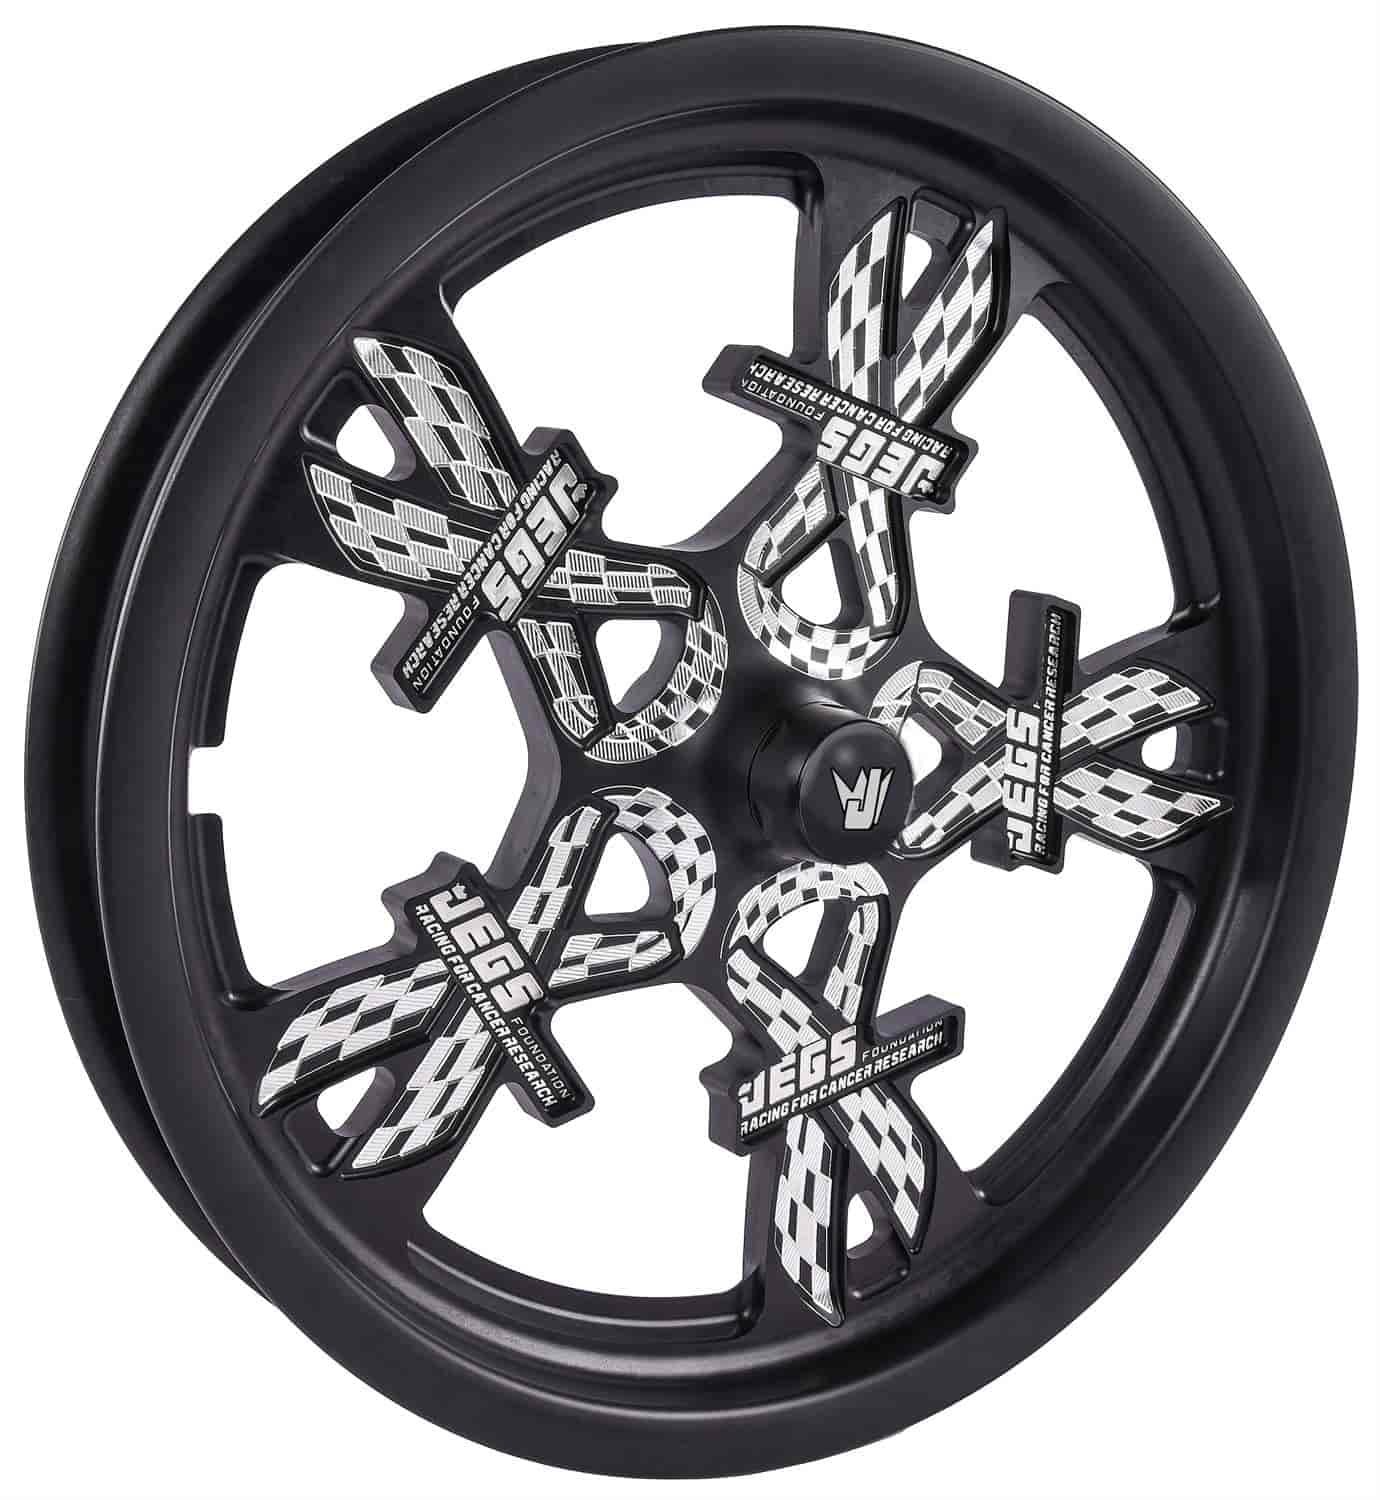 JEGS Cancer Foundation Ribbon Pro Forged Wheel Size: 17" x 2.4"